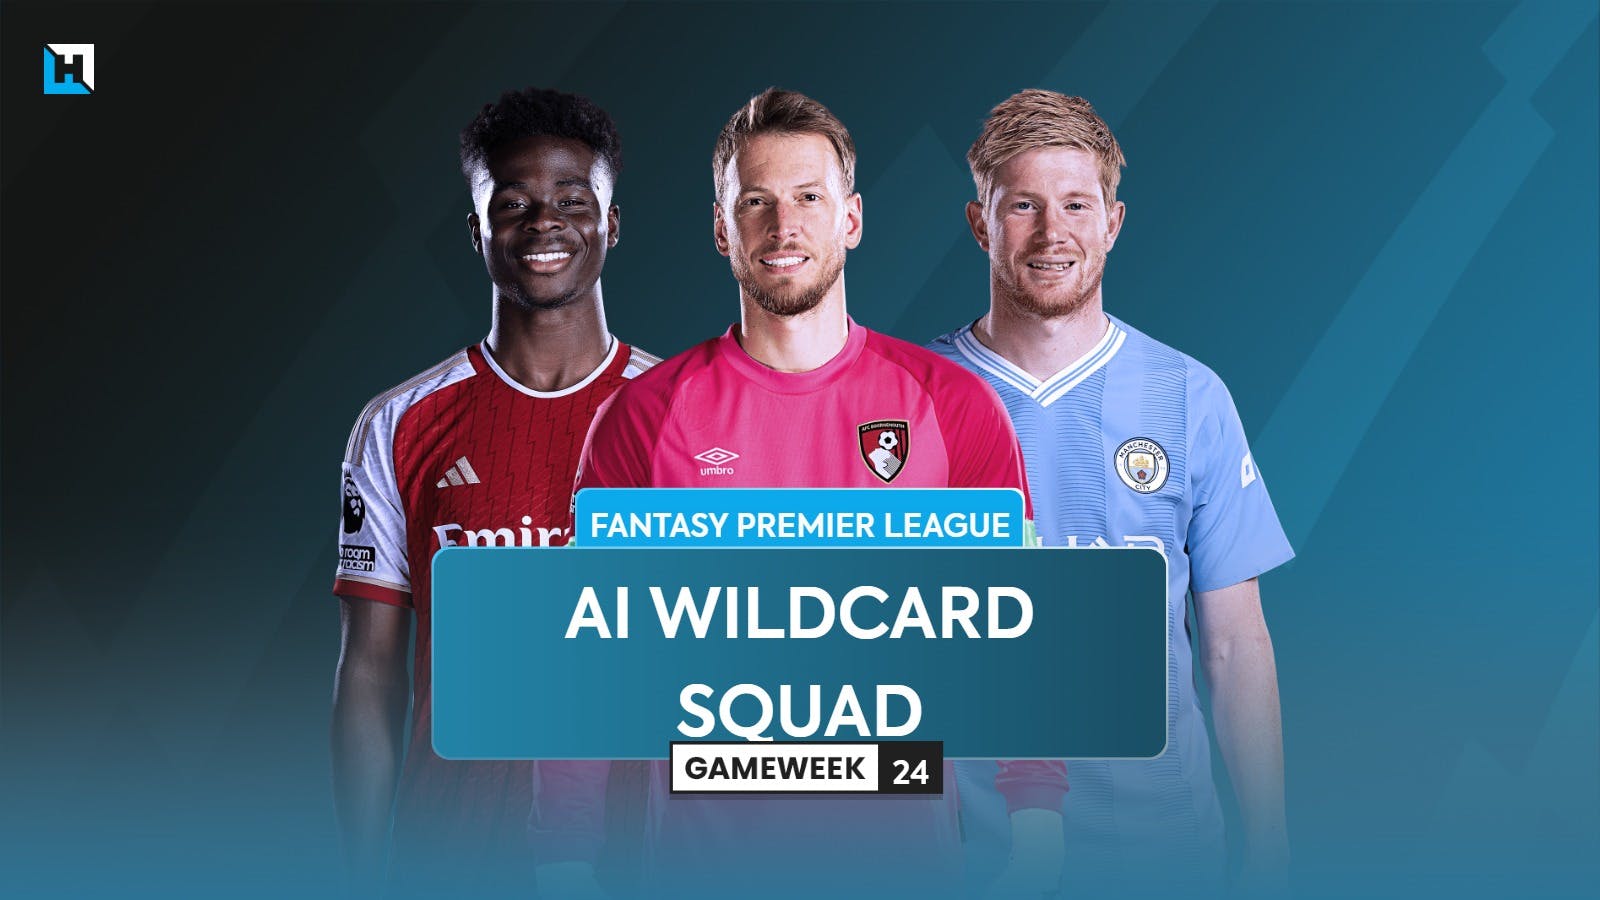 The best FPL Wildcard team for Gameweek 24 according to AI